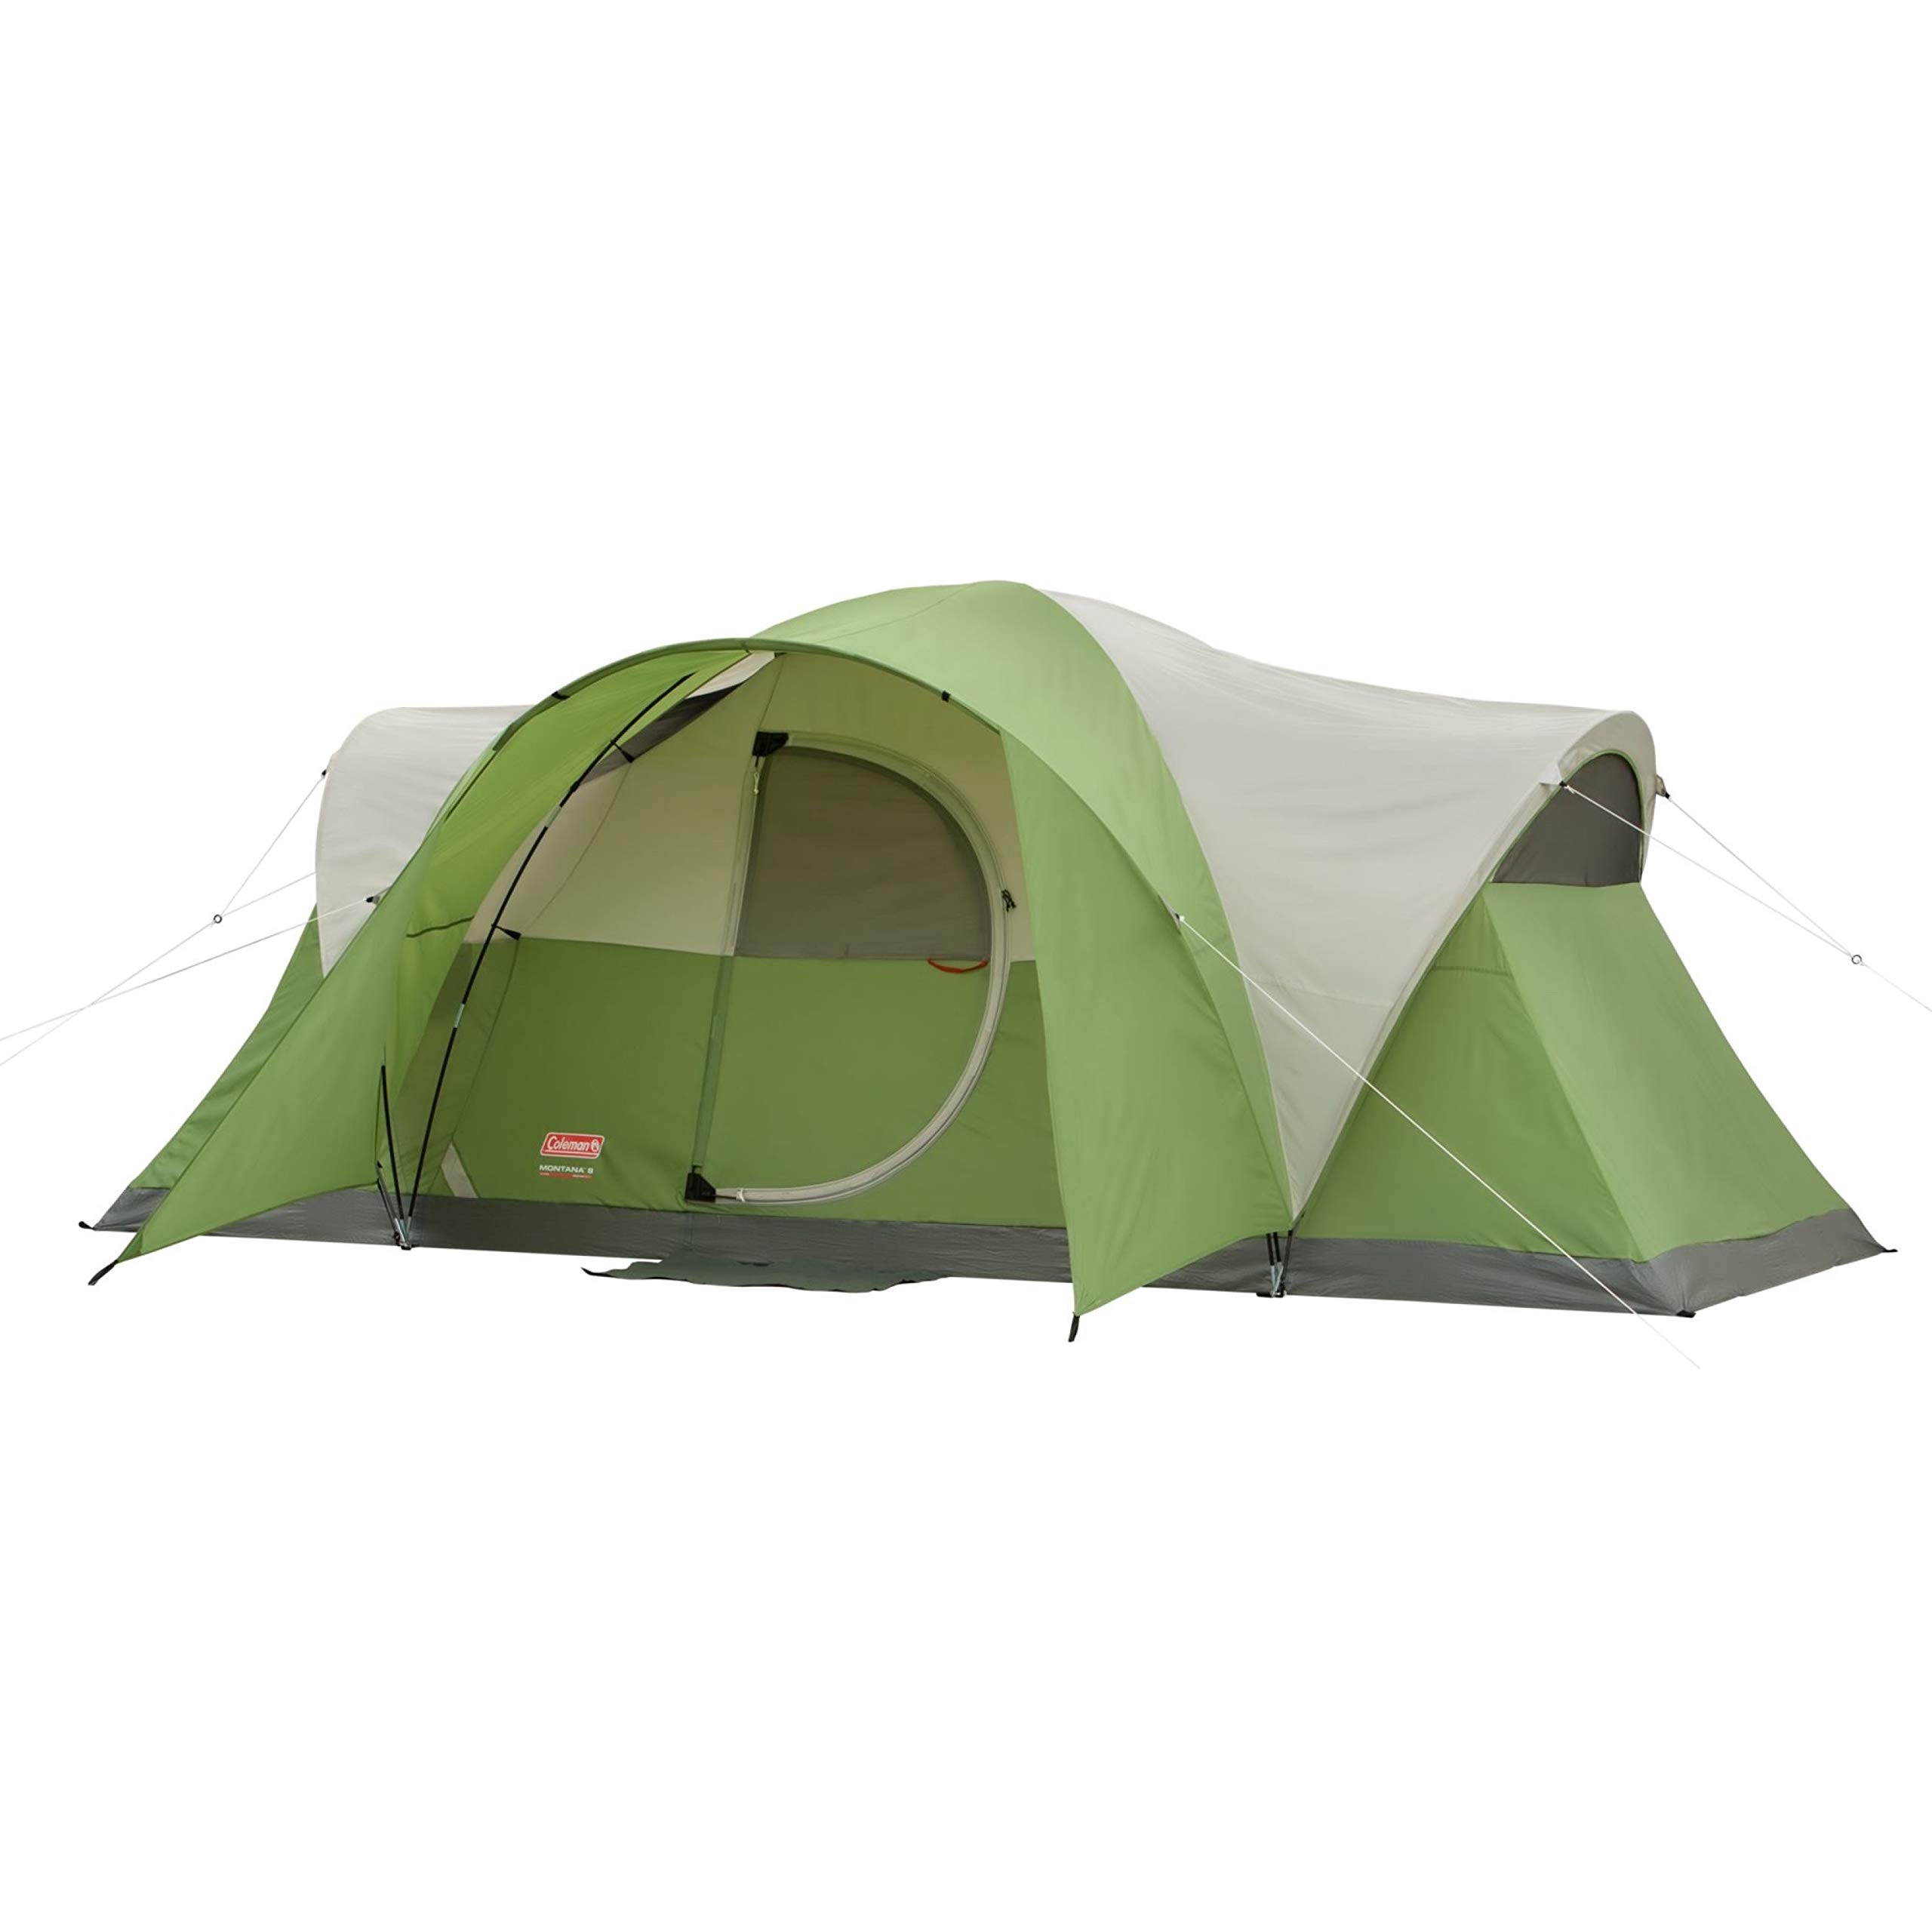 Book Cover Coleman Montana Camping Tent, 6/8 Person Family Tent with Included Rainfly, Carry Bag, and Spacious Interior, Fits Multiple Queen Airbeds and Sets Up in 15 Minutes Green 8-Person Tent